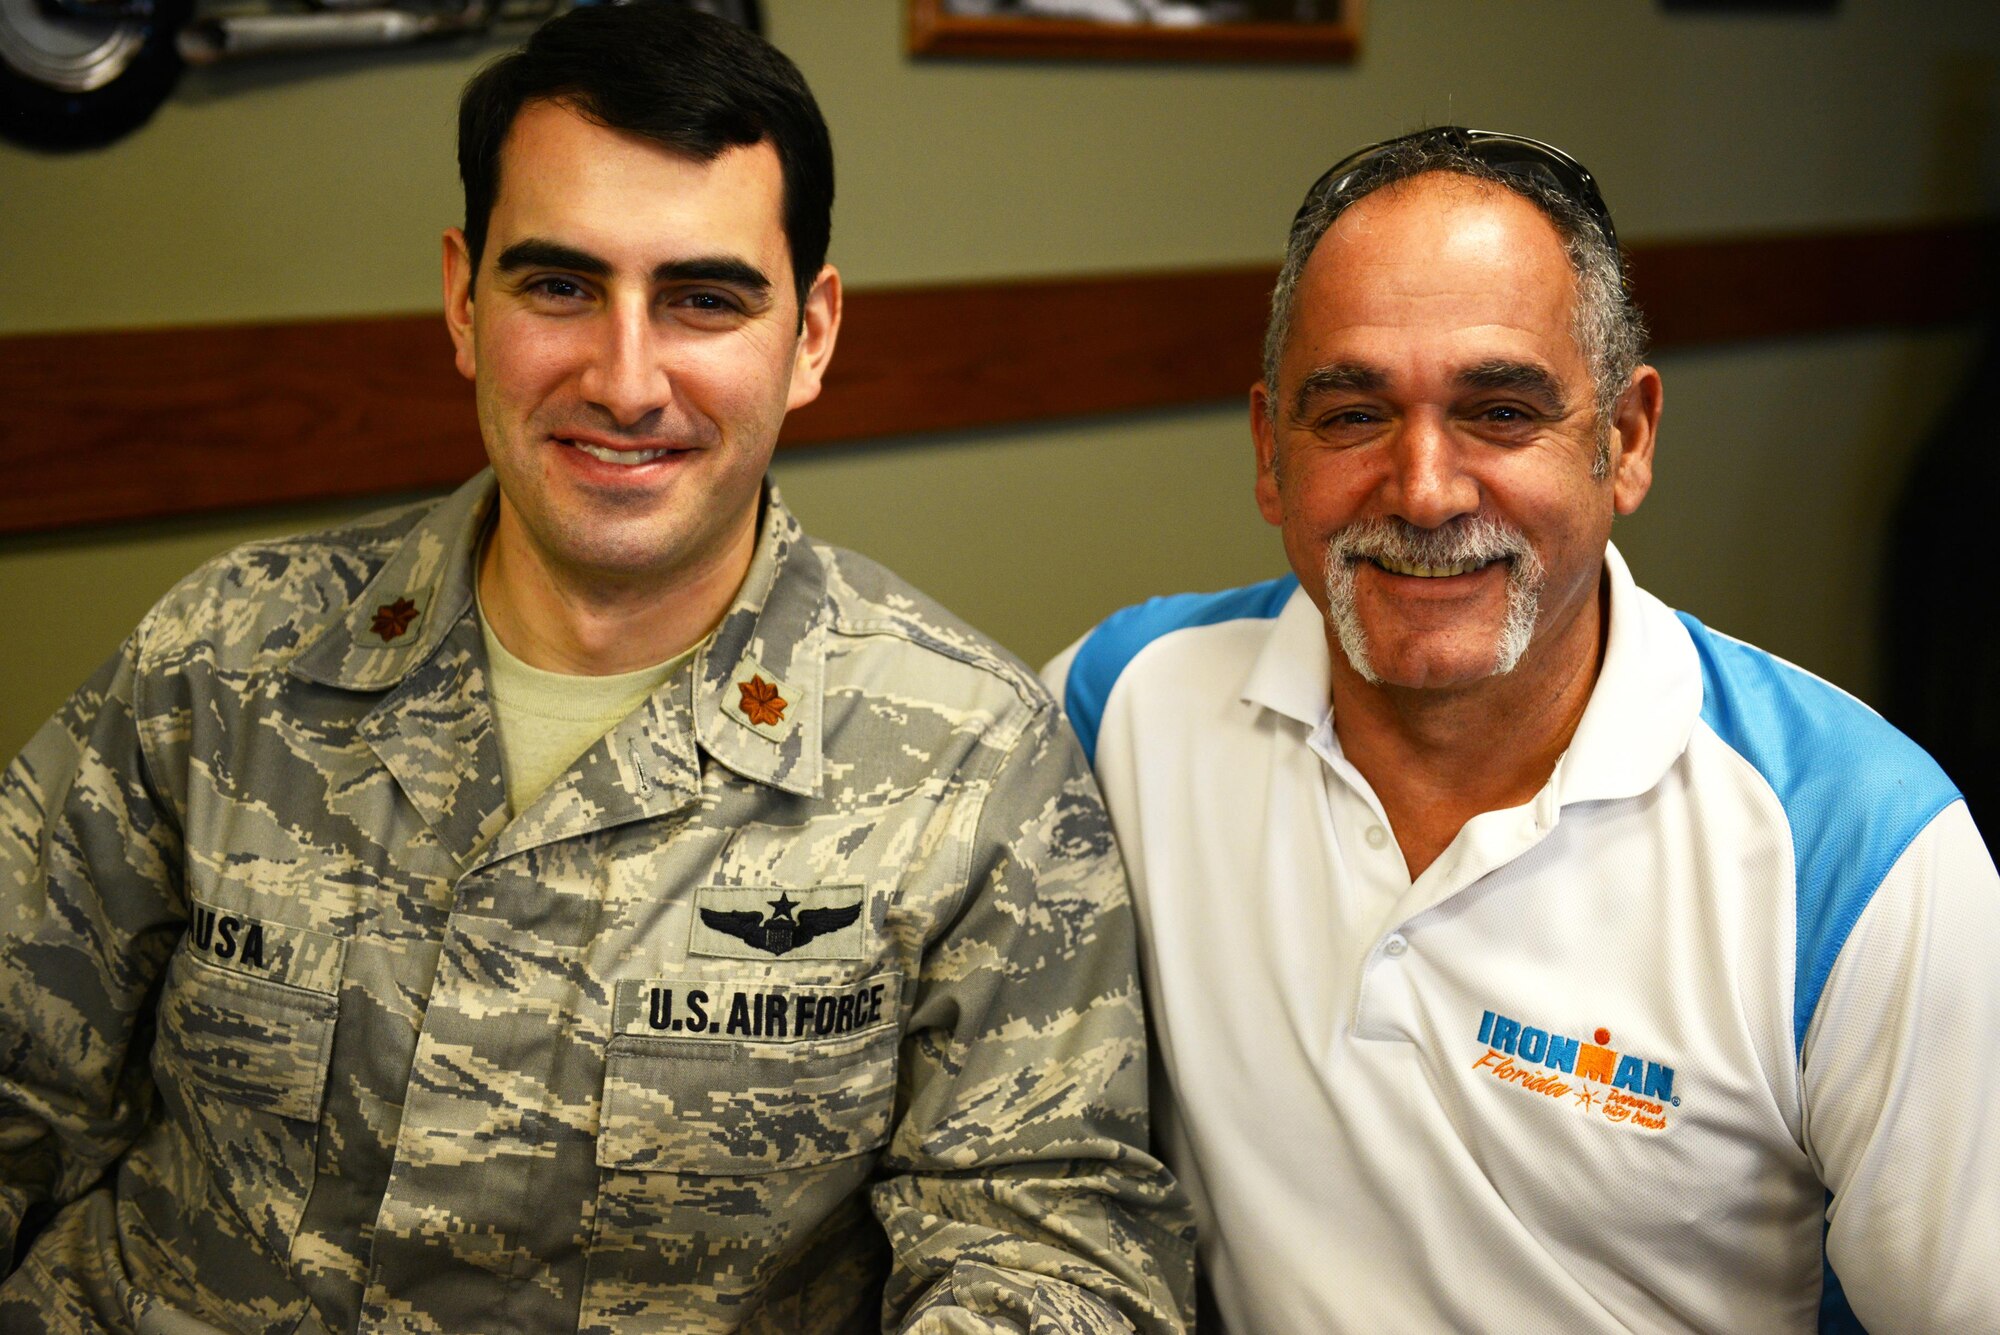 Maj. Stephen Rausa with retired Master Sgt. Ben Rausa  during their first-ever meeting since becoming pen pals 25 years ago on Jan. 25, 2016, at Hurlburt Field, Fla. (U.S. Air Force photo/Mike Raynor)